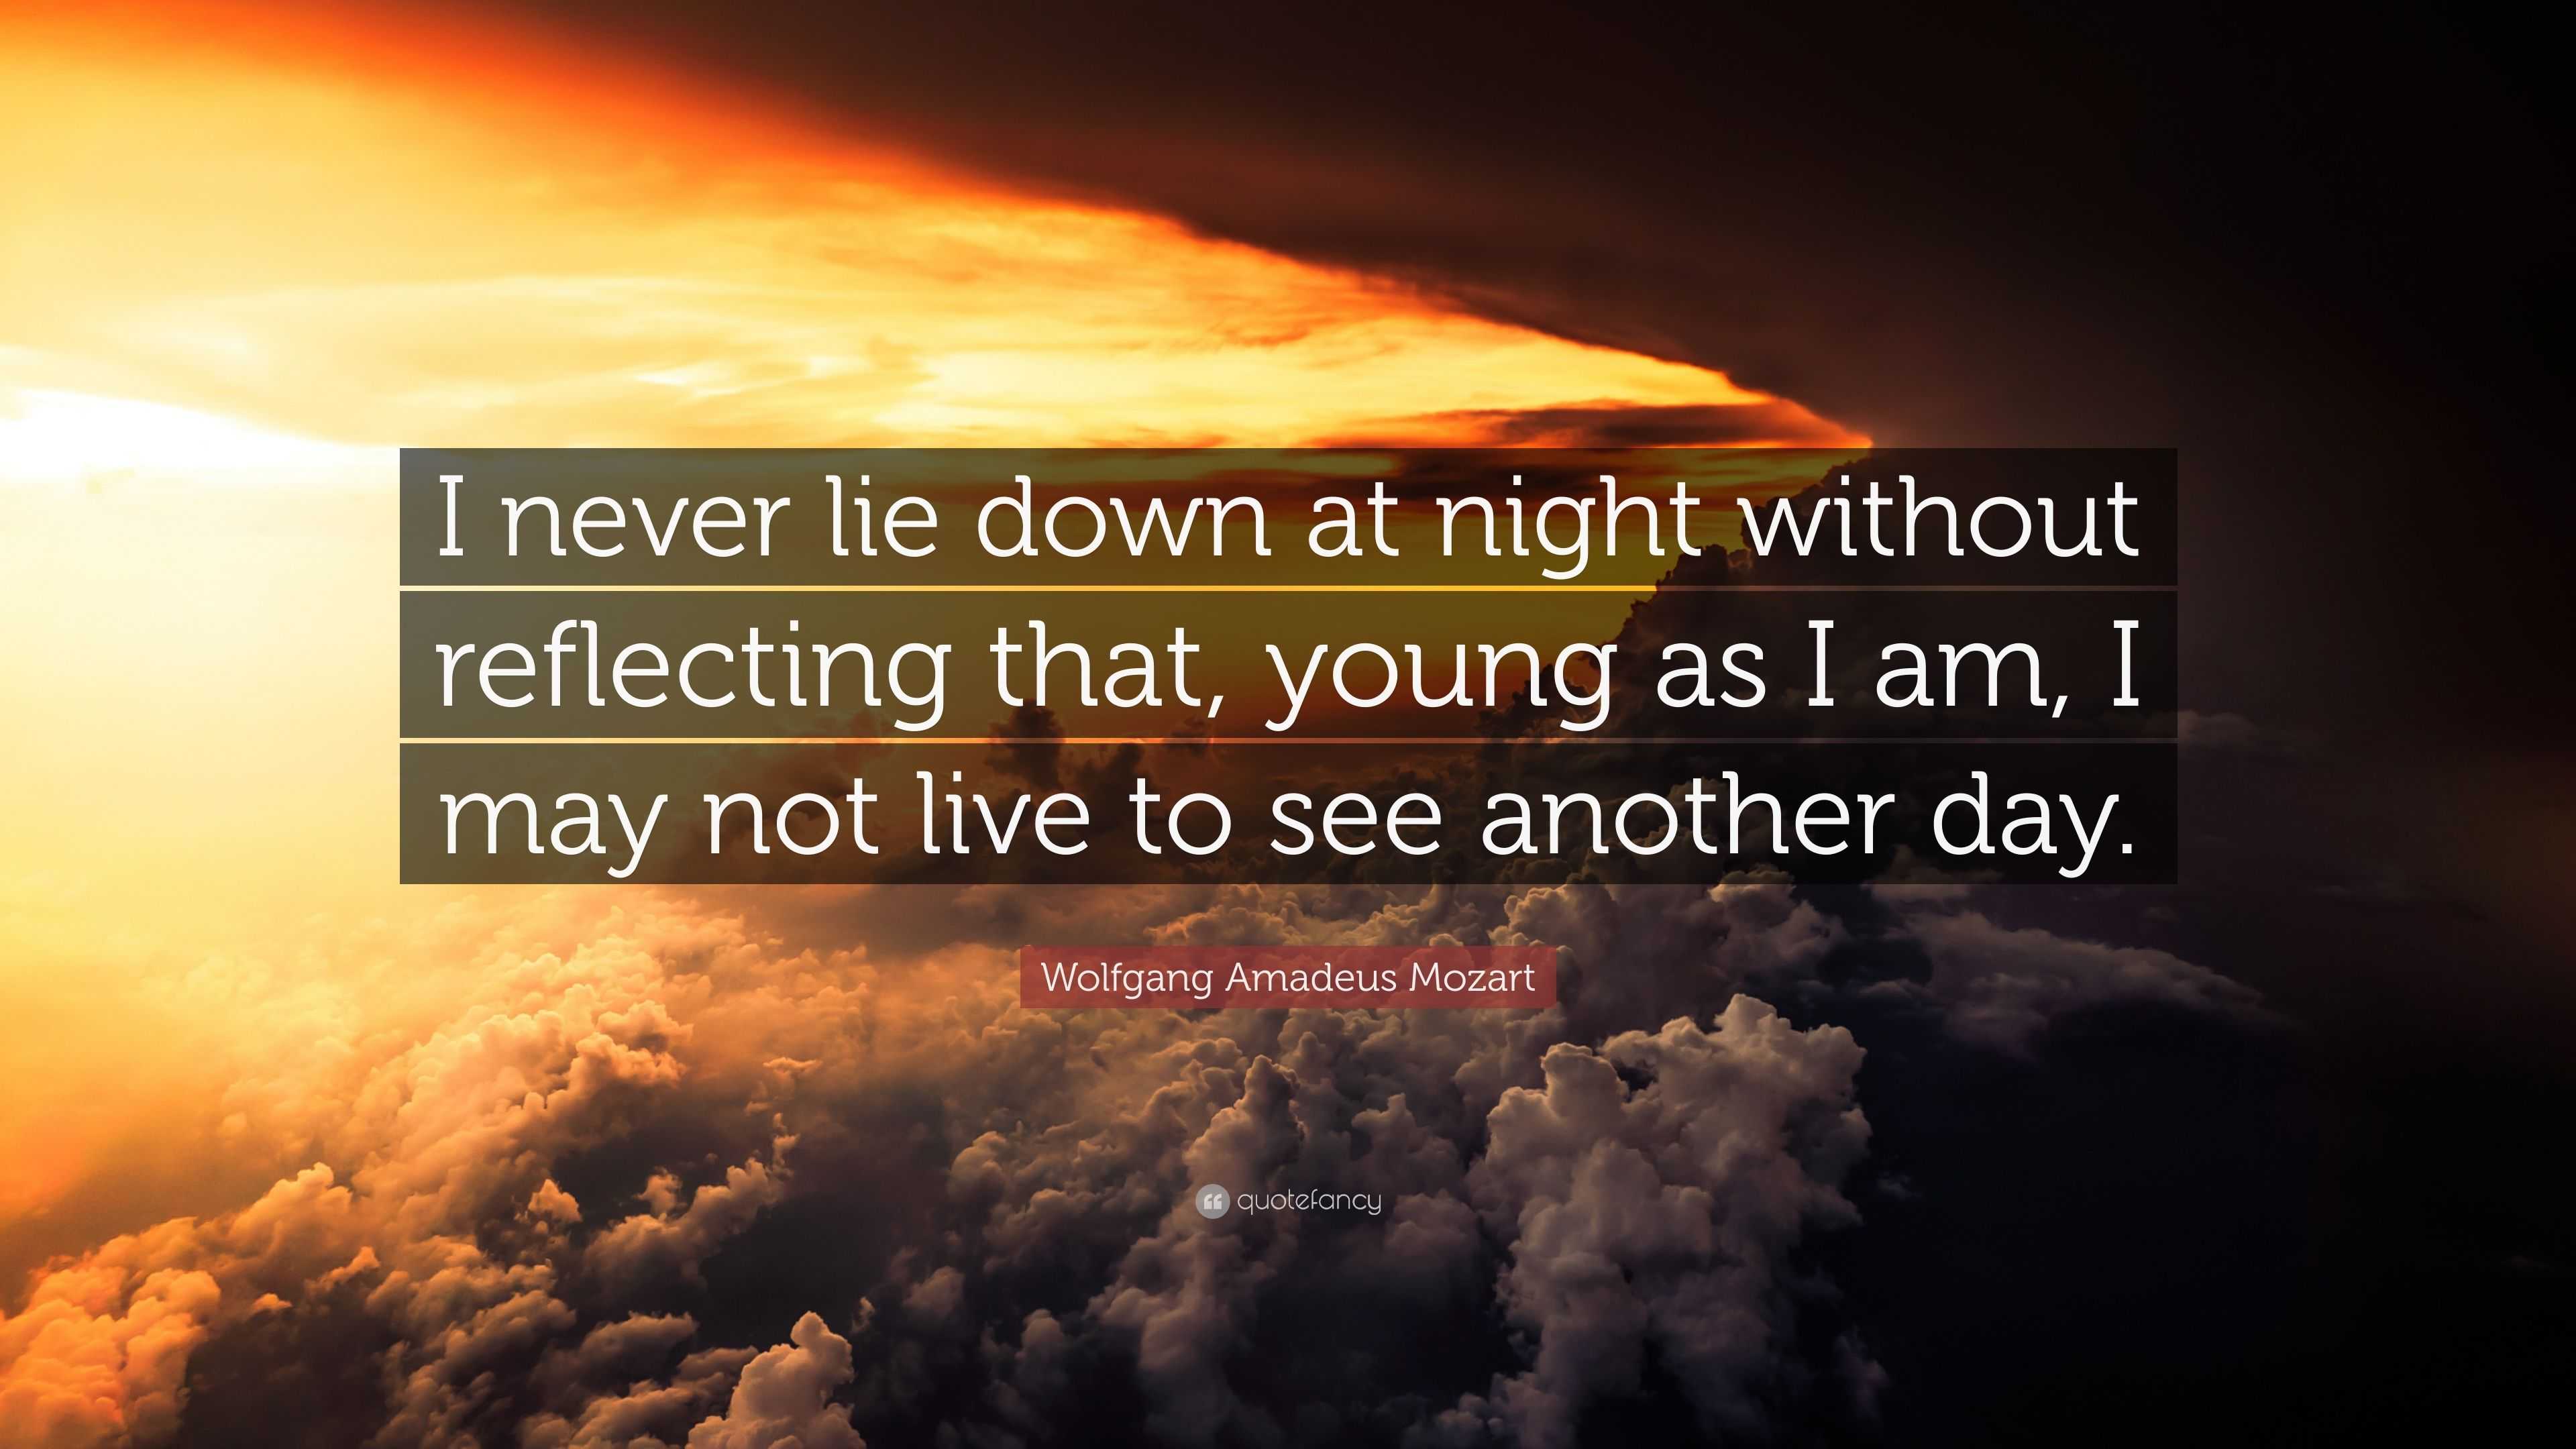 Wolfgang Amadeus Mozart Quote I Never Lie Down At Night Without Images, Photos, Reviews